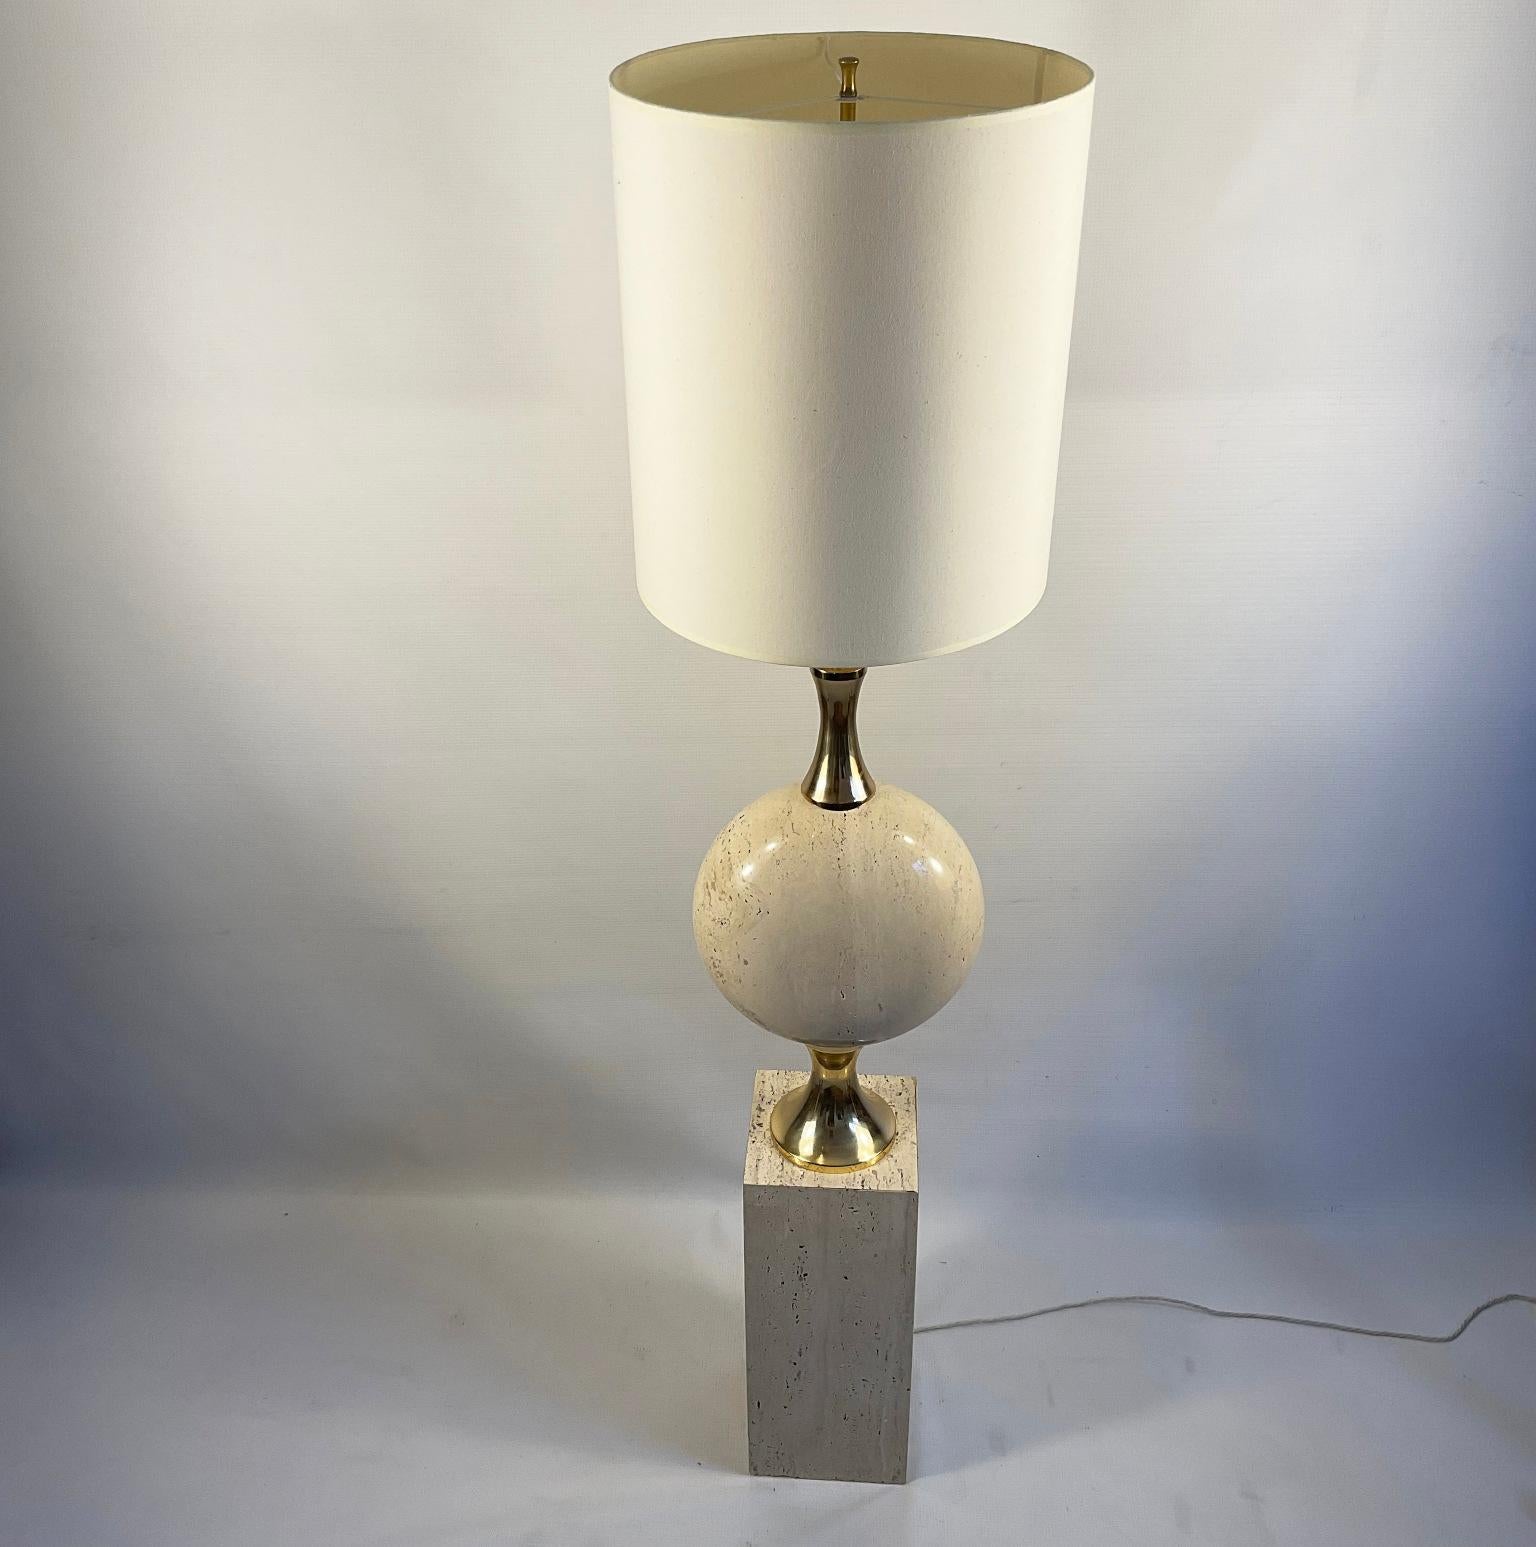 French 1970s Travertine Floor Lamp by Philippe Barbier for Maison Barbier Paris France For Sale